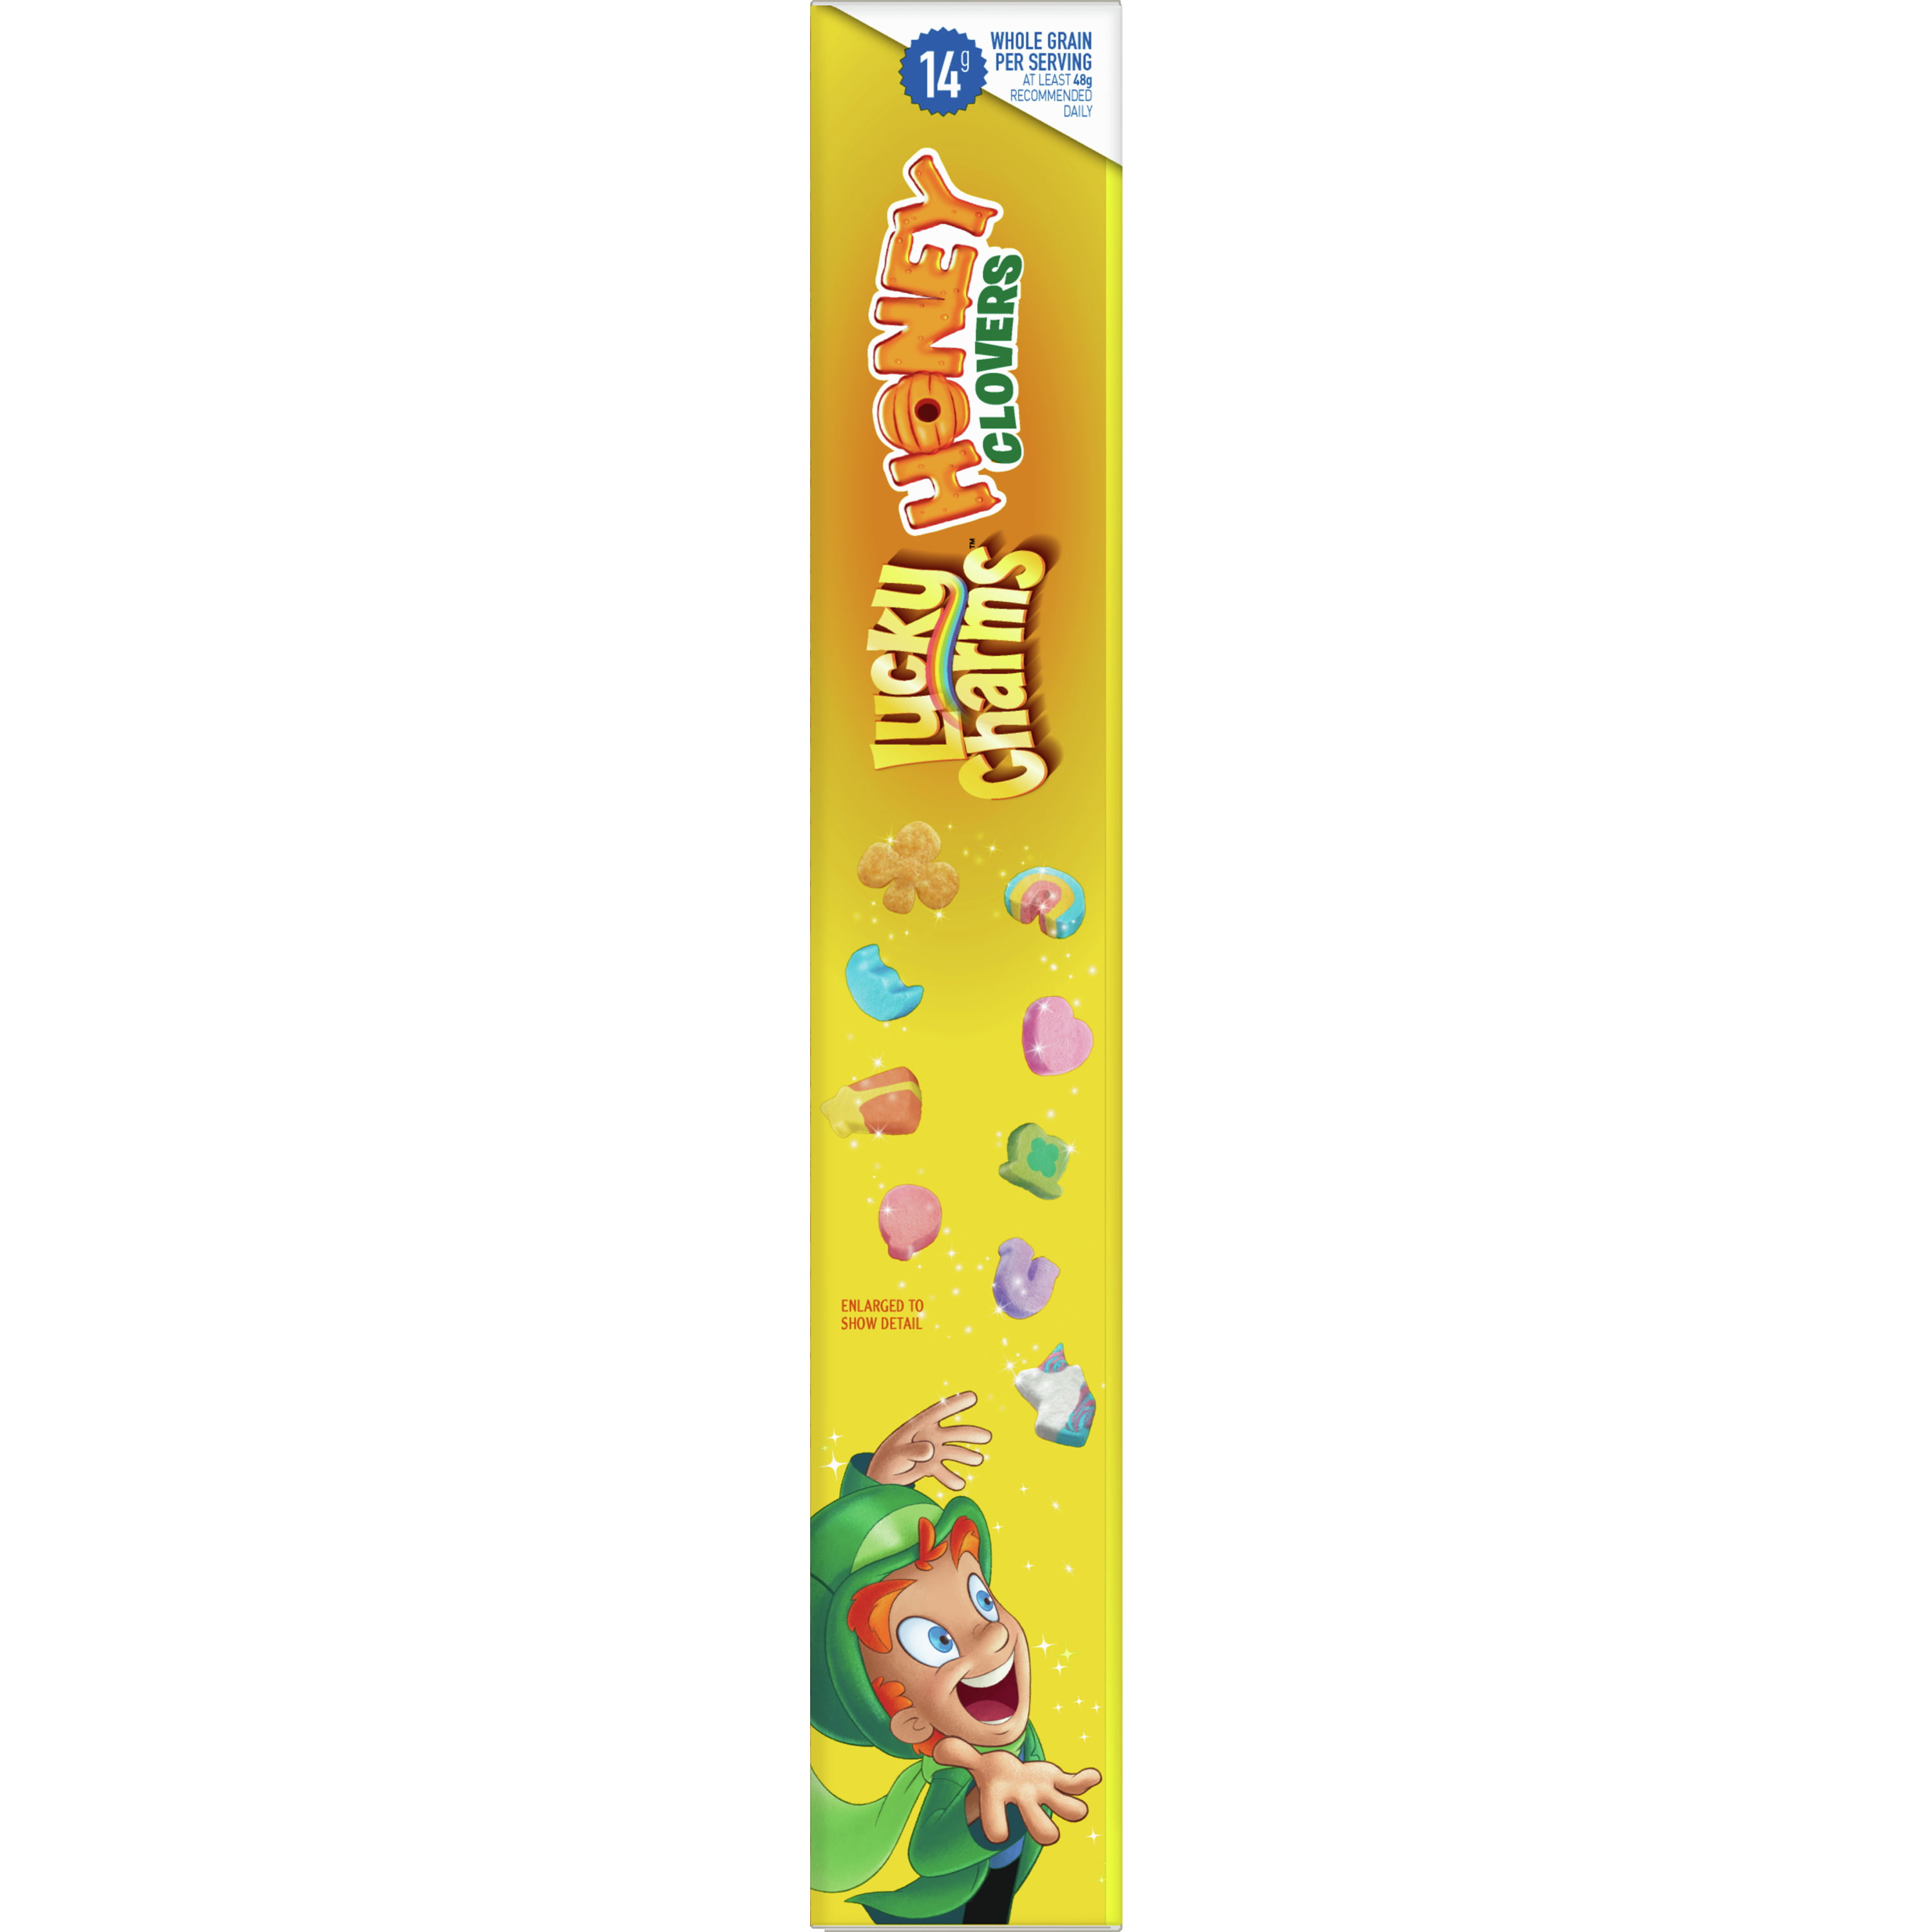 Cereales Lucky Charms Honey con miel. (EEUU) - Andalubox